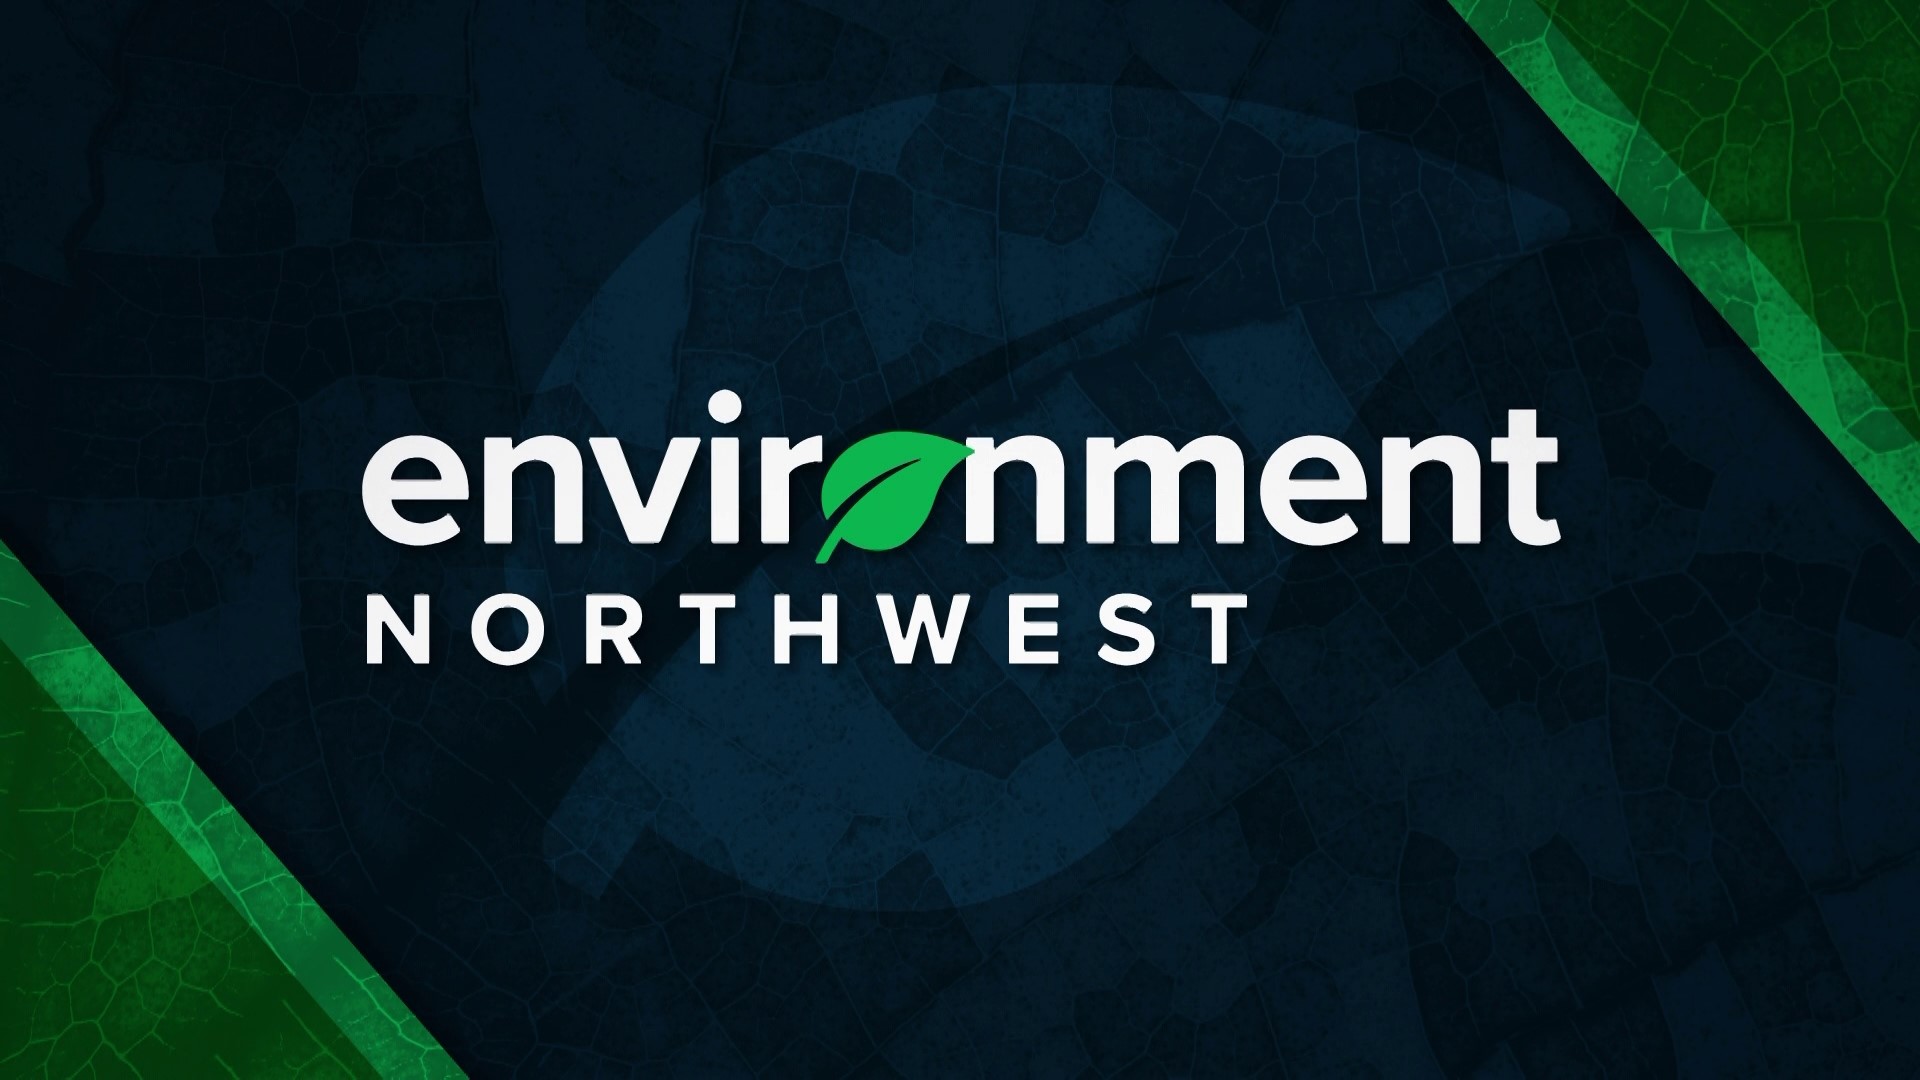 Environmental Changes and Creative Solutions | Environment Northwest Special